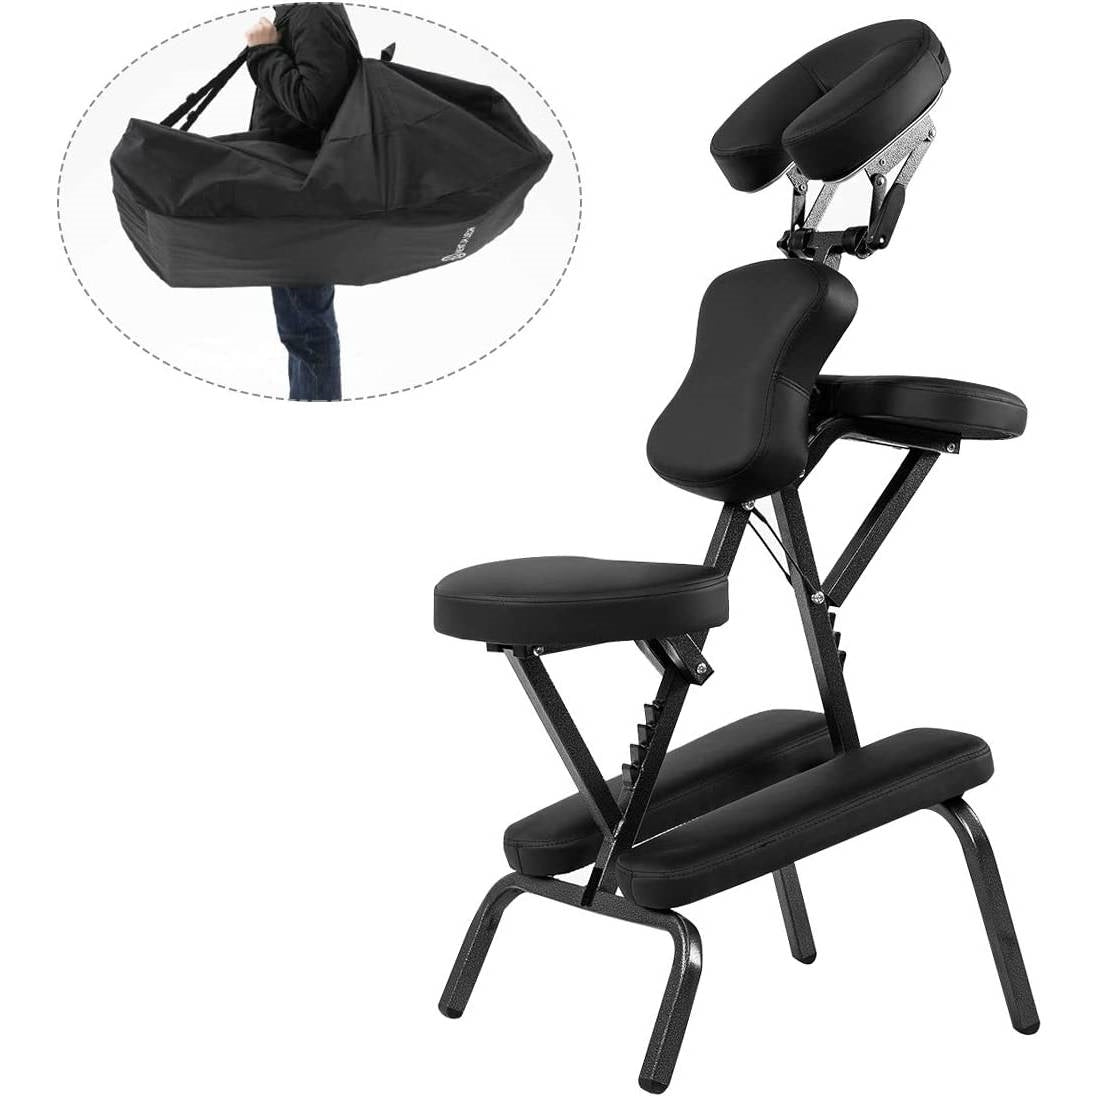 Black Portable Massage Tattoo Chair with Carrying Bag